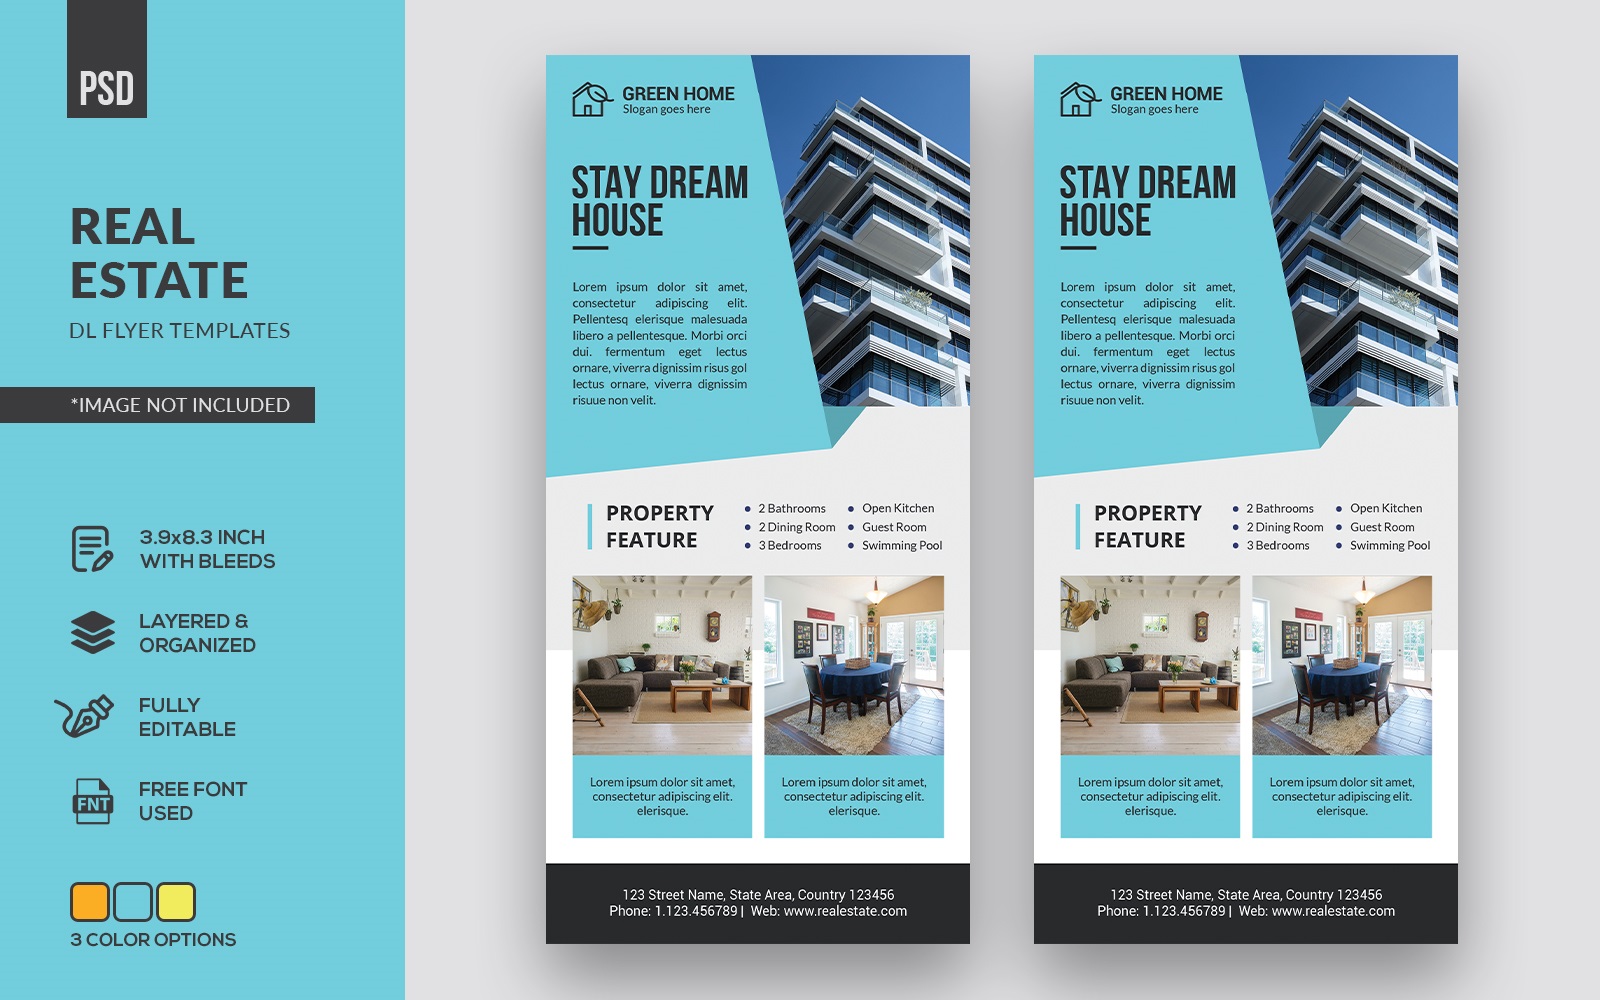 Real Estate DL Flyer - Corporate Identity Template